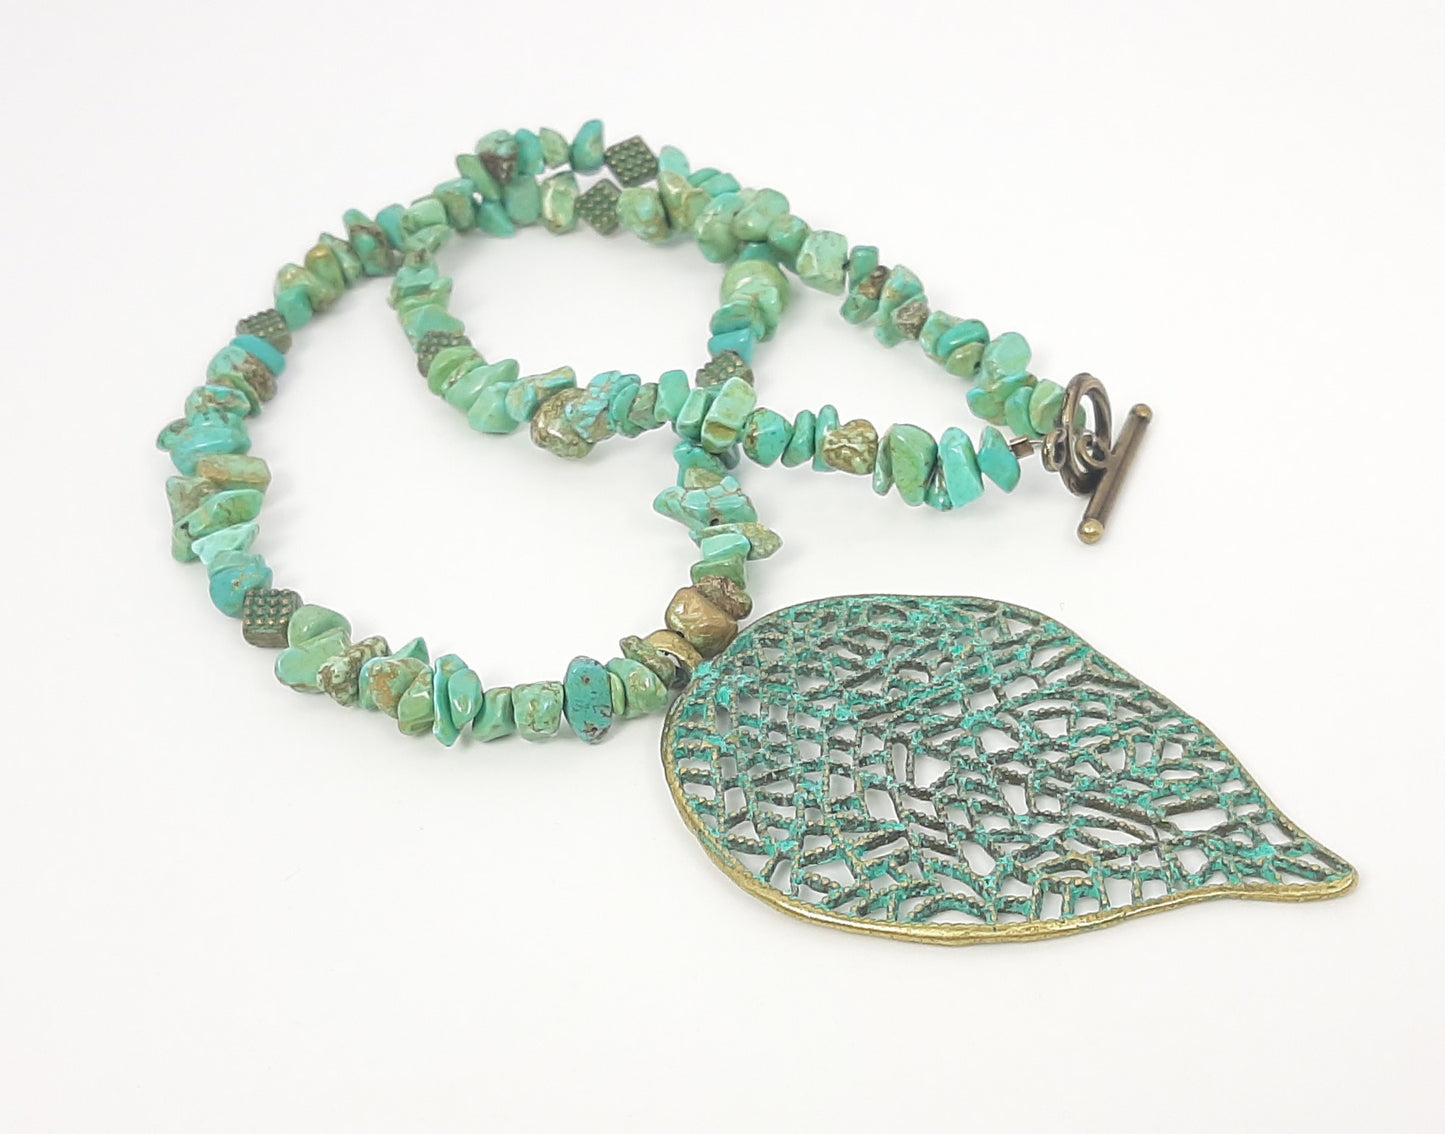 Howlite Dyed Chip Beads + Large Patina Leaf Pendant Necklace